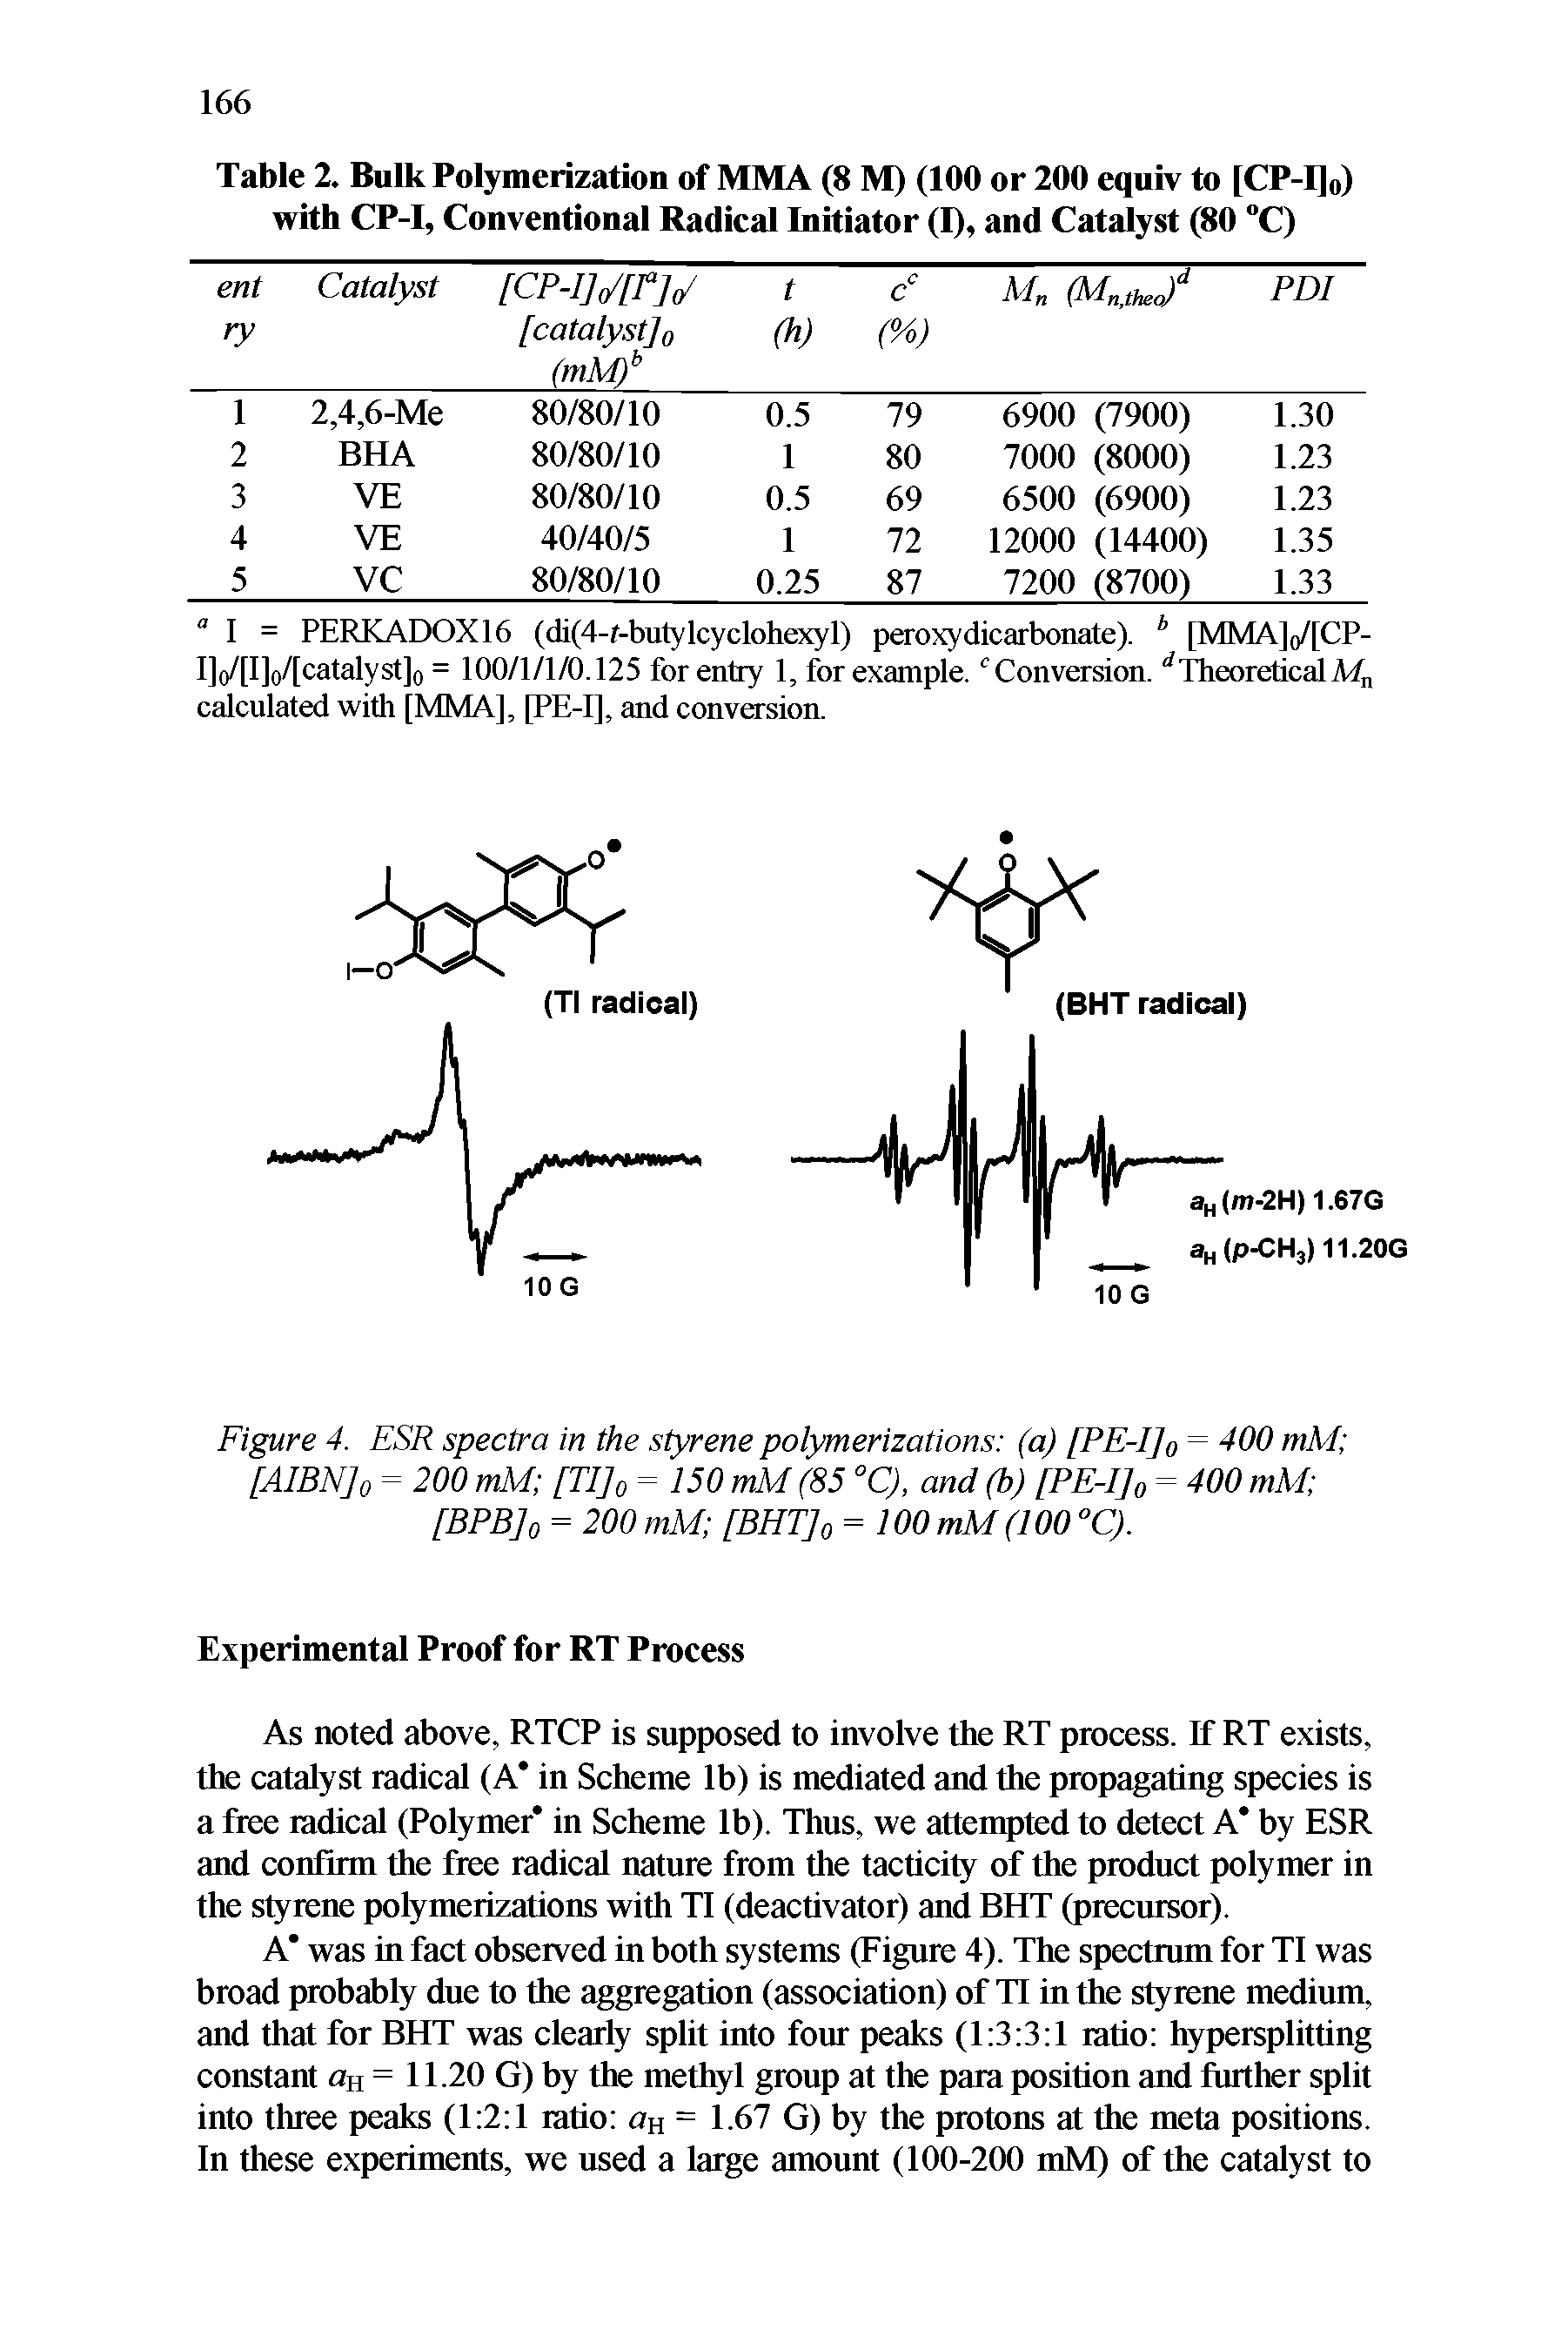 Table 2. Bulk Polymerization of MMA (8 M) (100 or 200 equiv to [CP-I]o) with CP-I, Conventional Radical Initiator (I), and Catalyst (80 "C)...